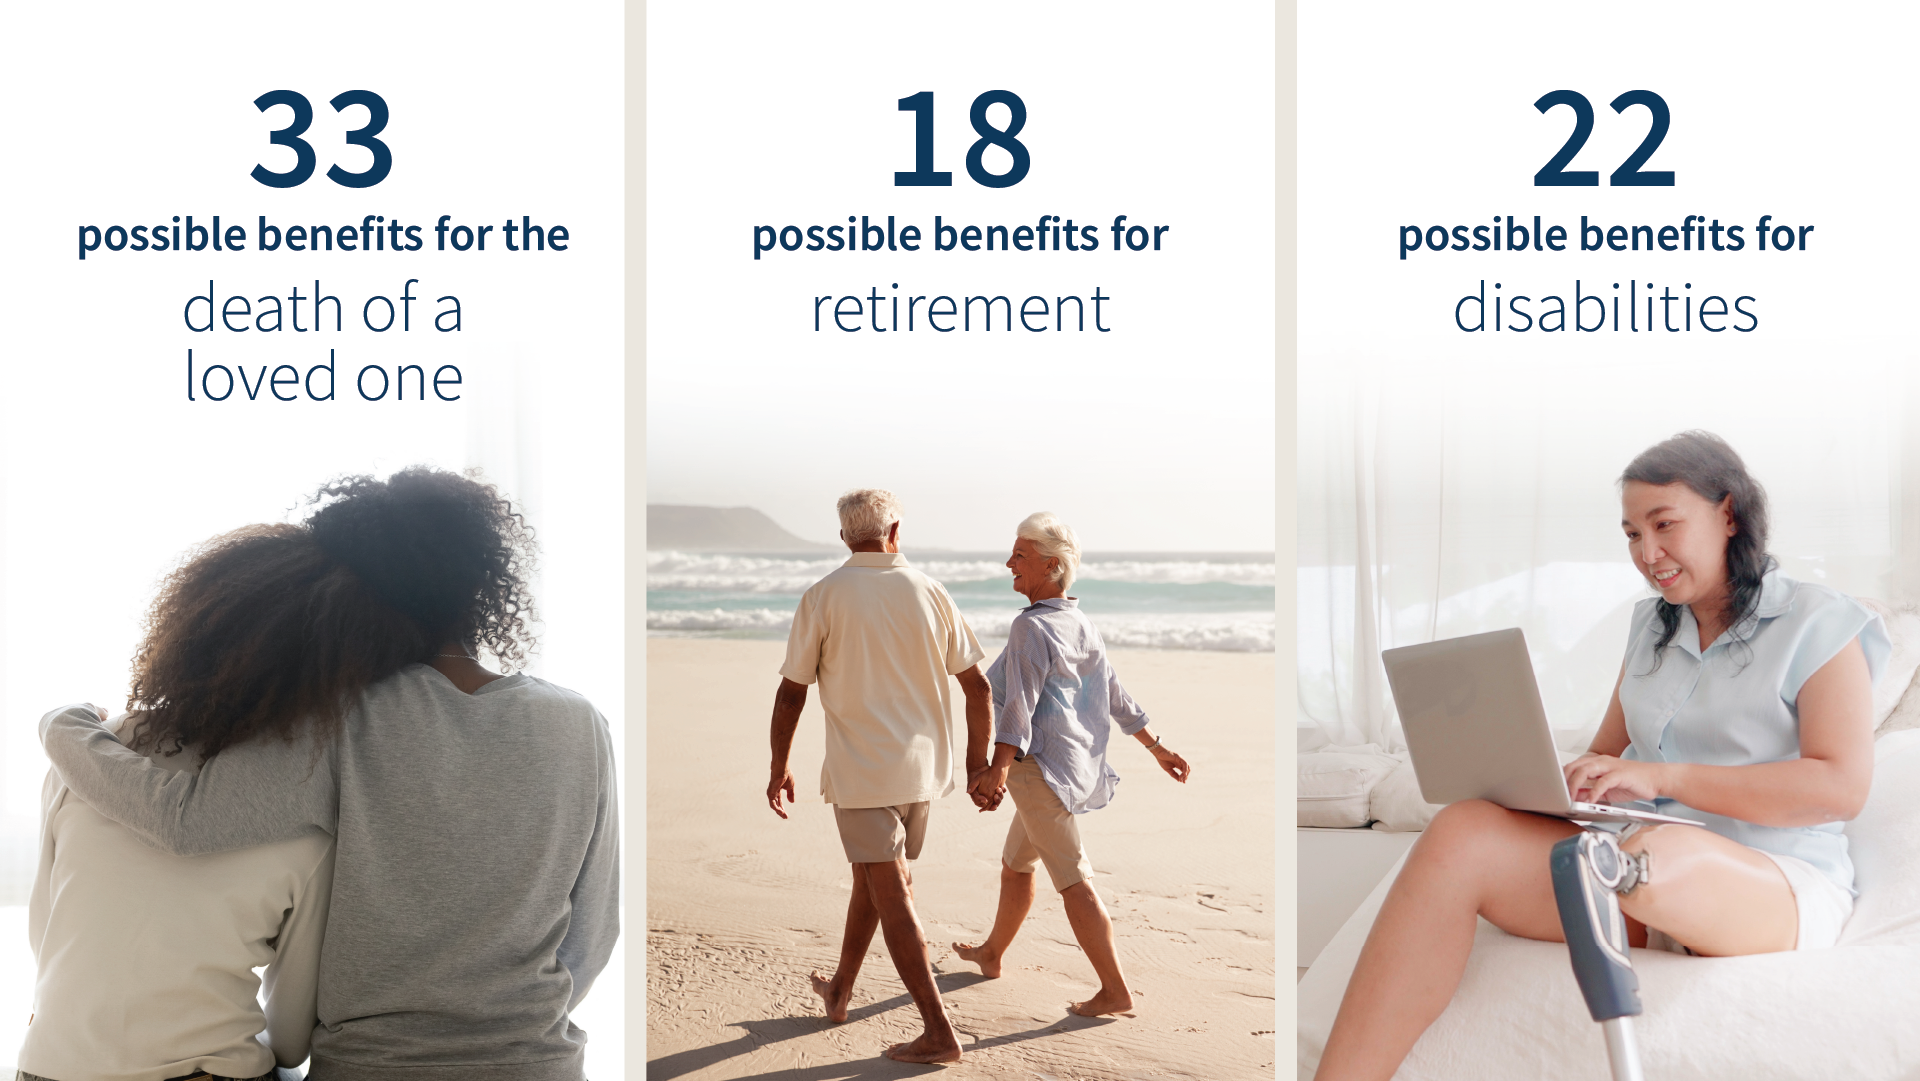 3 sections for the 3 benefits, section 1: person consoling friend, text: 33 possible benefits for the death of a loved one. Section 2: senior couple walking on beach. Text: 18 possible benefits for retirement. Section 3: person with prosthetic leg on computer. Text: 22 possible benefits for disabilities.